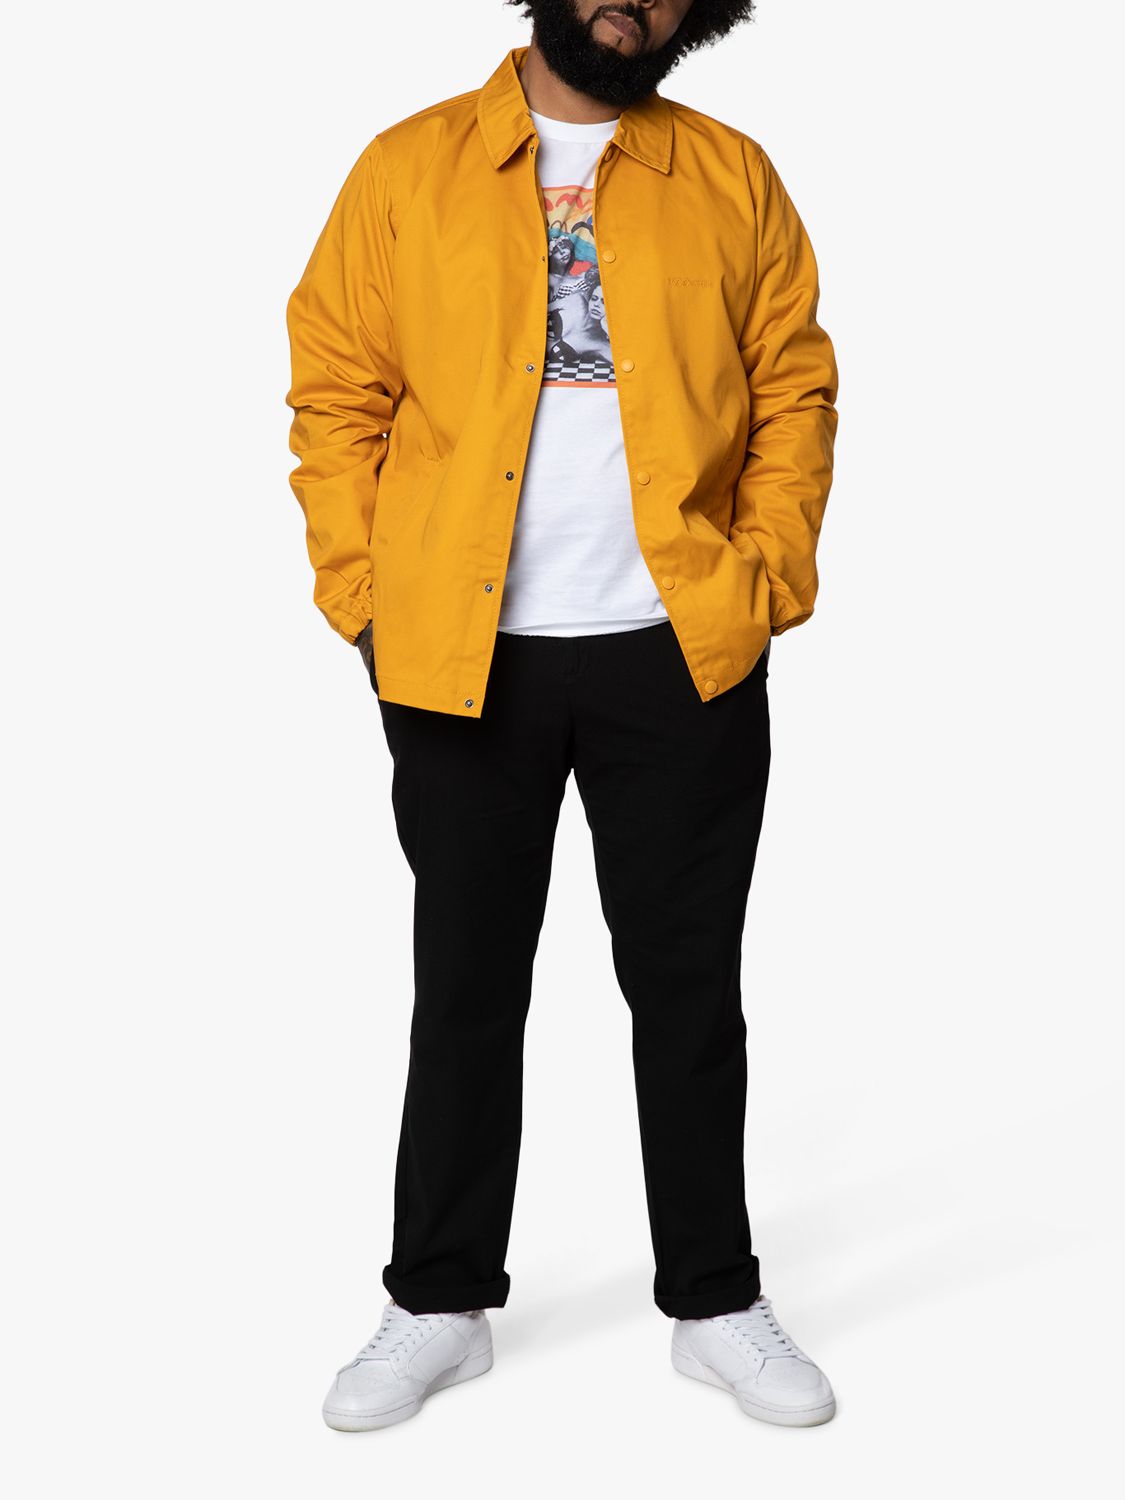 M.C.Overalls Fitted Coach Jacket, Mustard Yellow, S